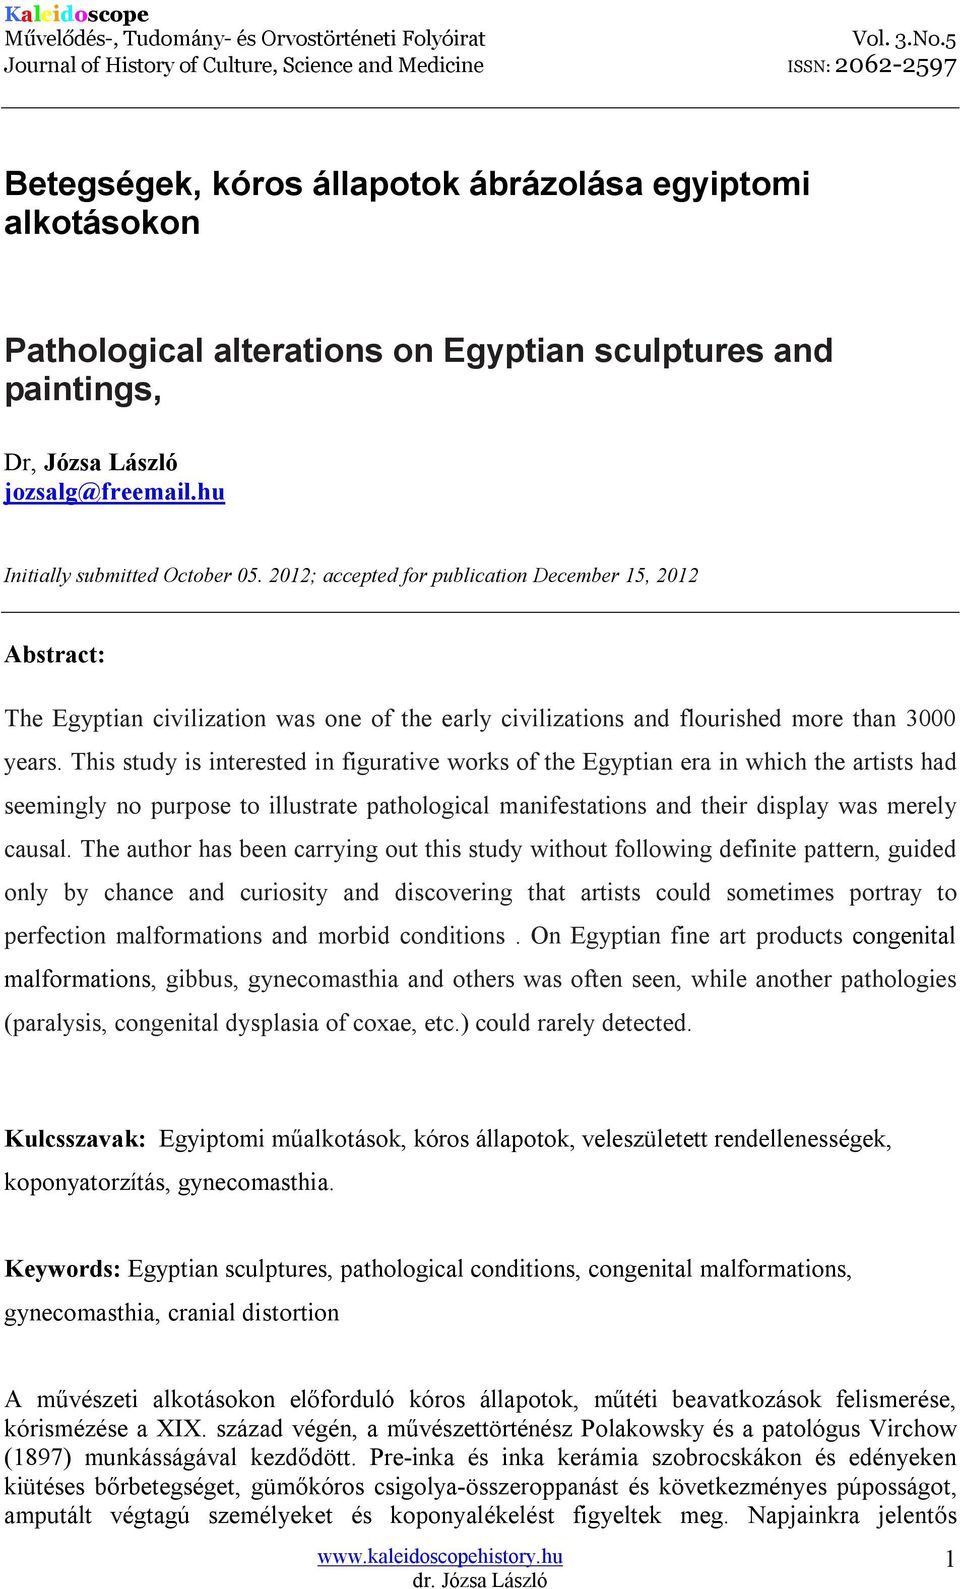 This study is interested in figurative works of the Egyptian era in which the artists had seemingly no purpose to illustrate pathological manifestations and their display was merely causal.